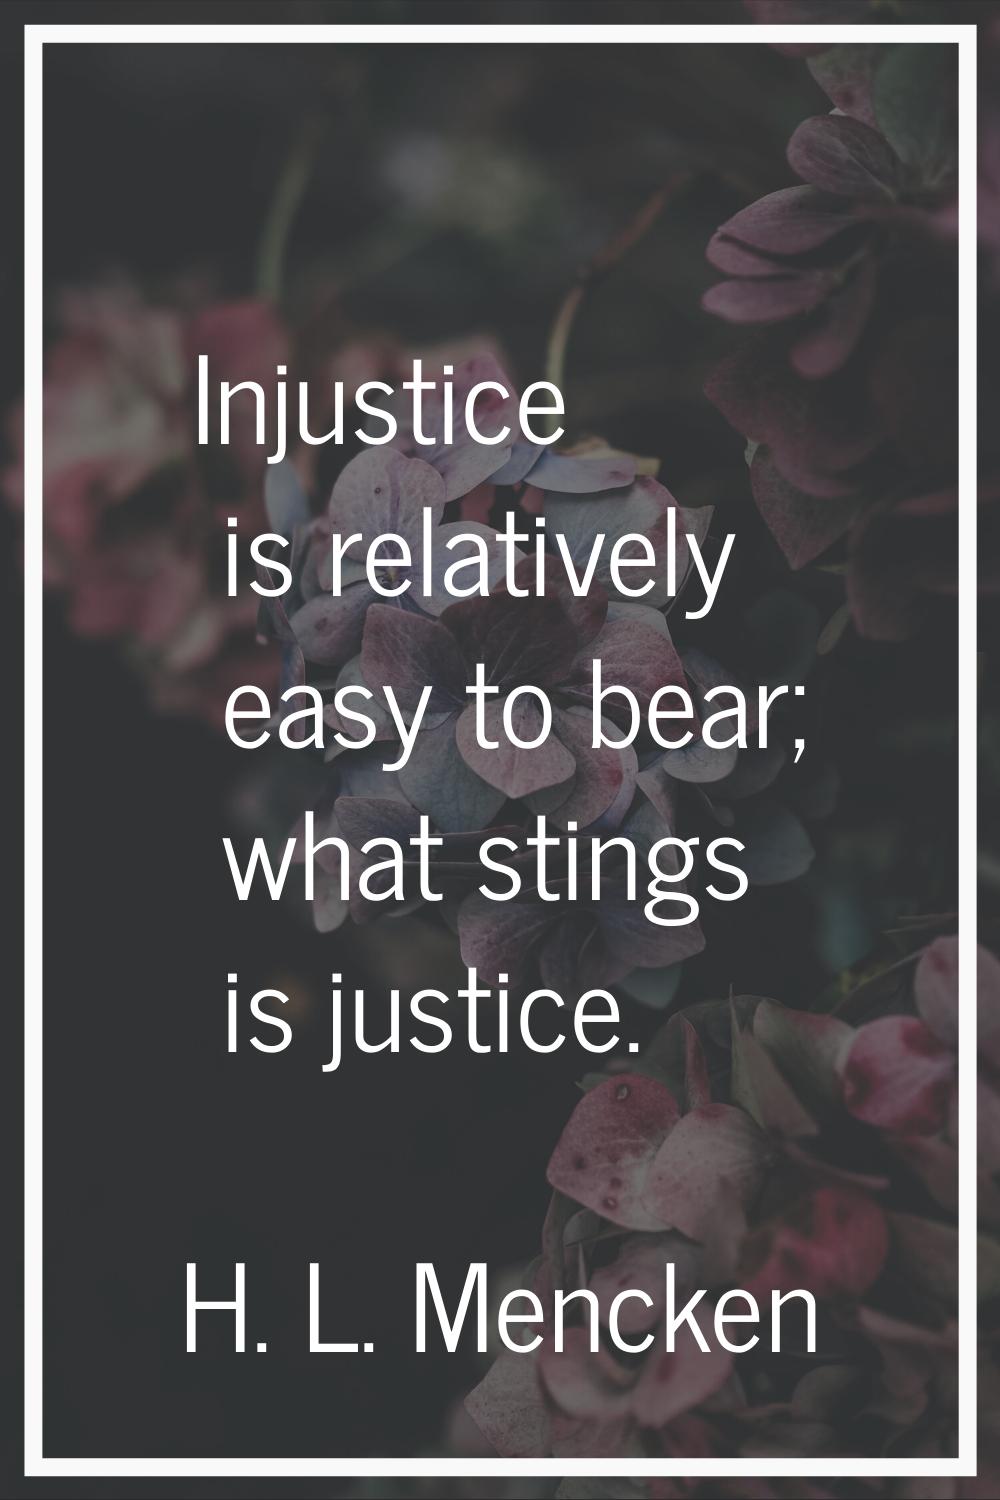 Injustice is relatively easy to bear; what stings is justice.